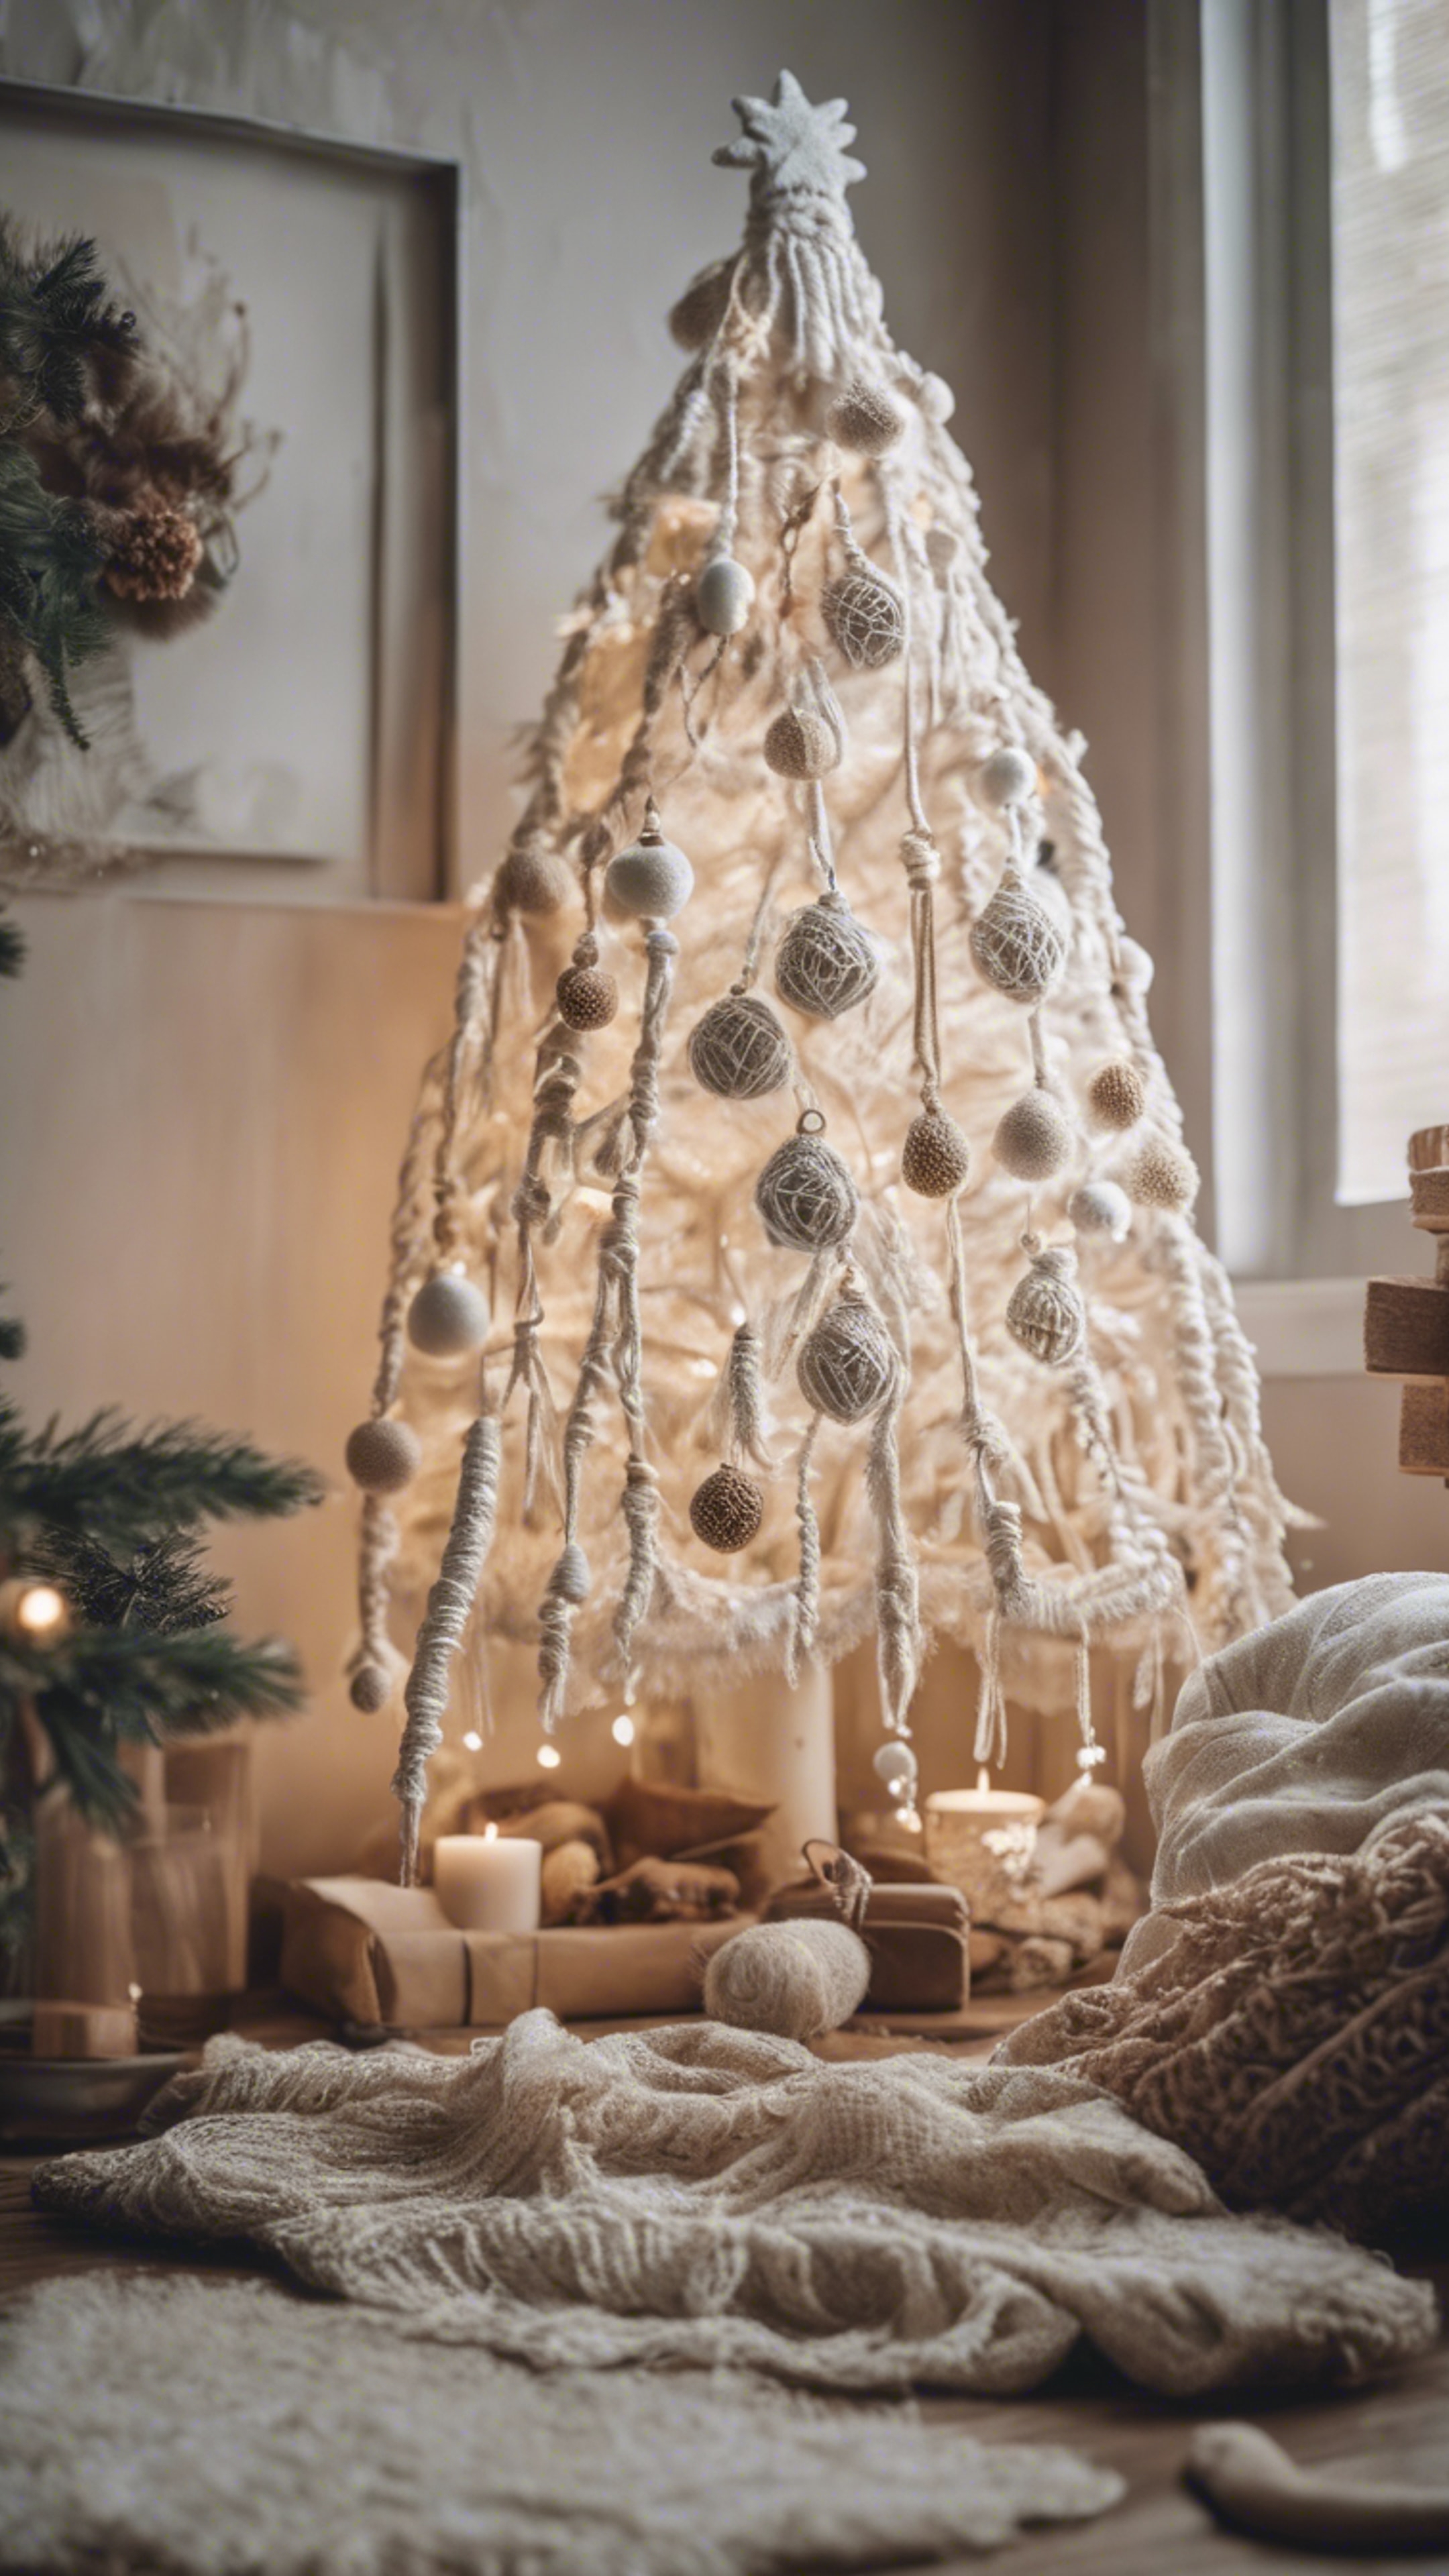 A white Christmas tree adorned with handmade macrame decorations in a boho-inspired room. Валлпапер[c062b7b22ca84faf9af8]